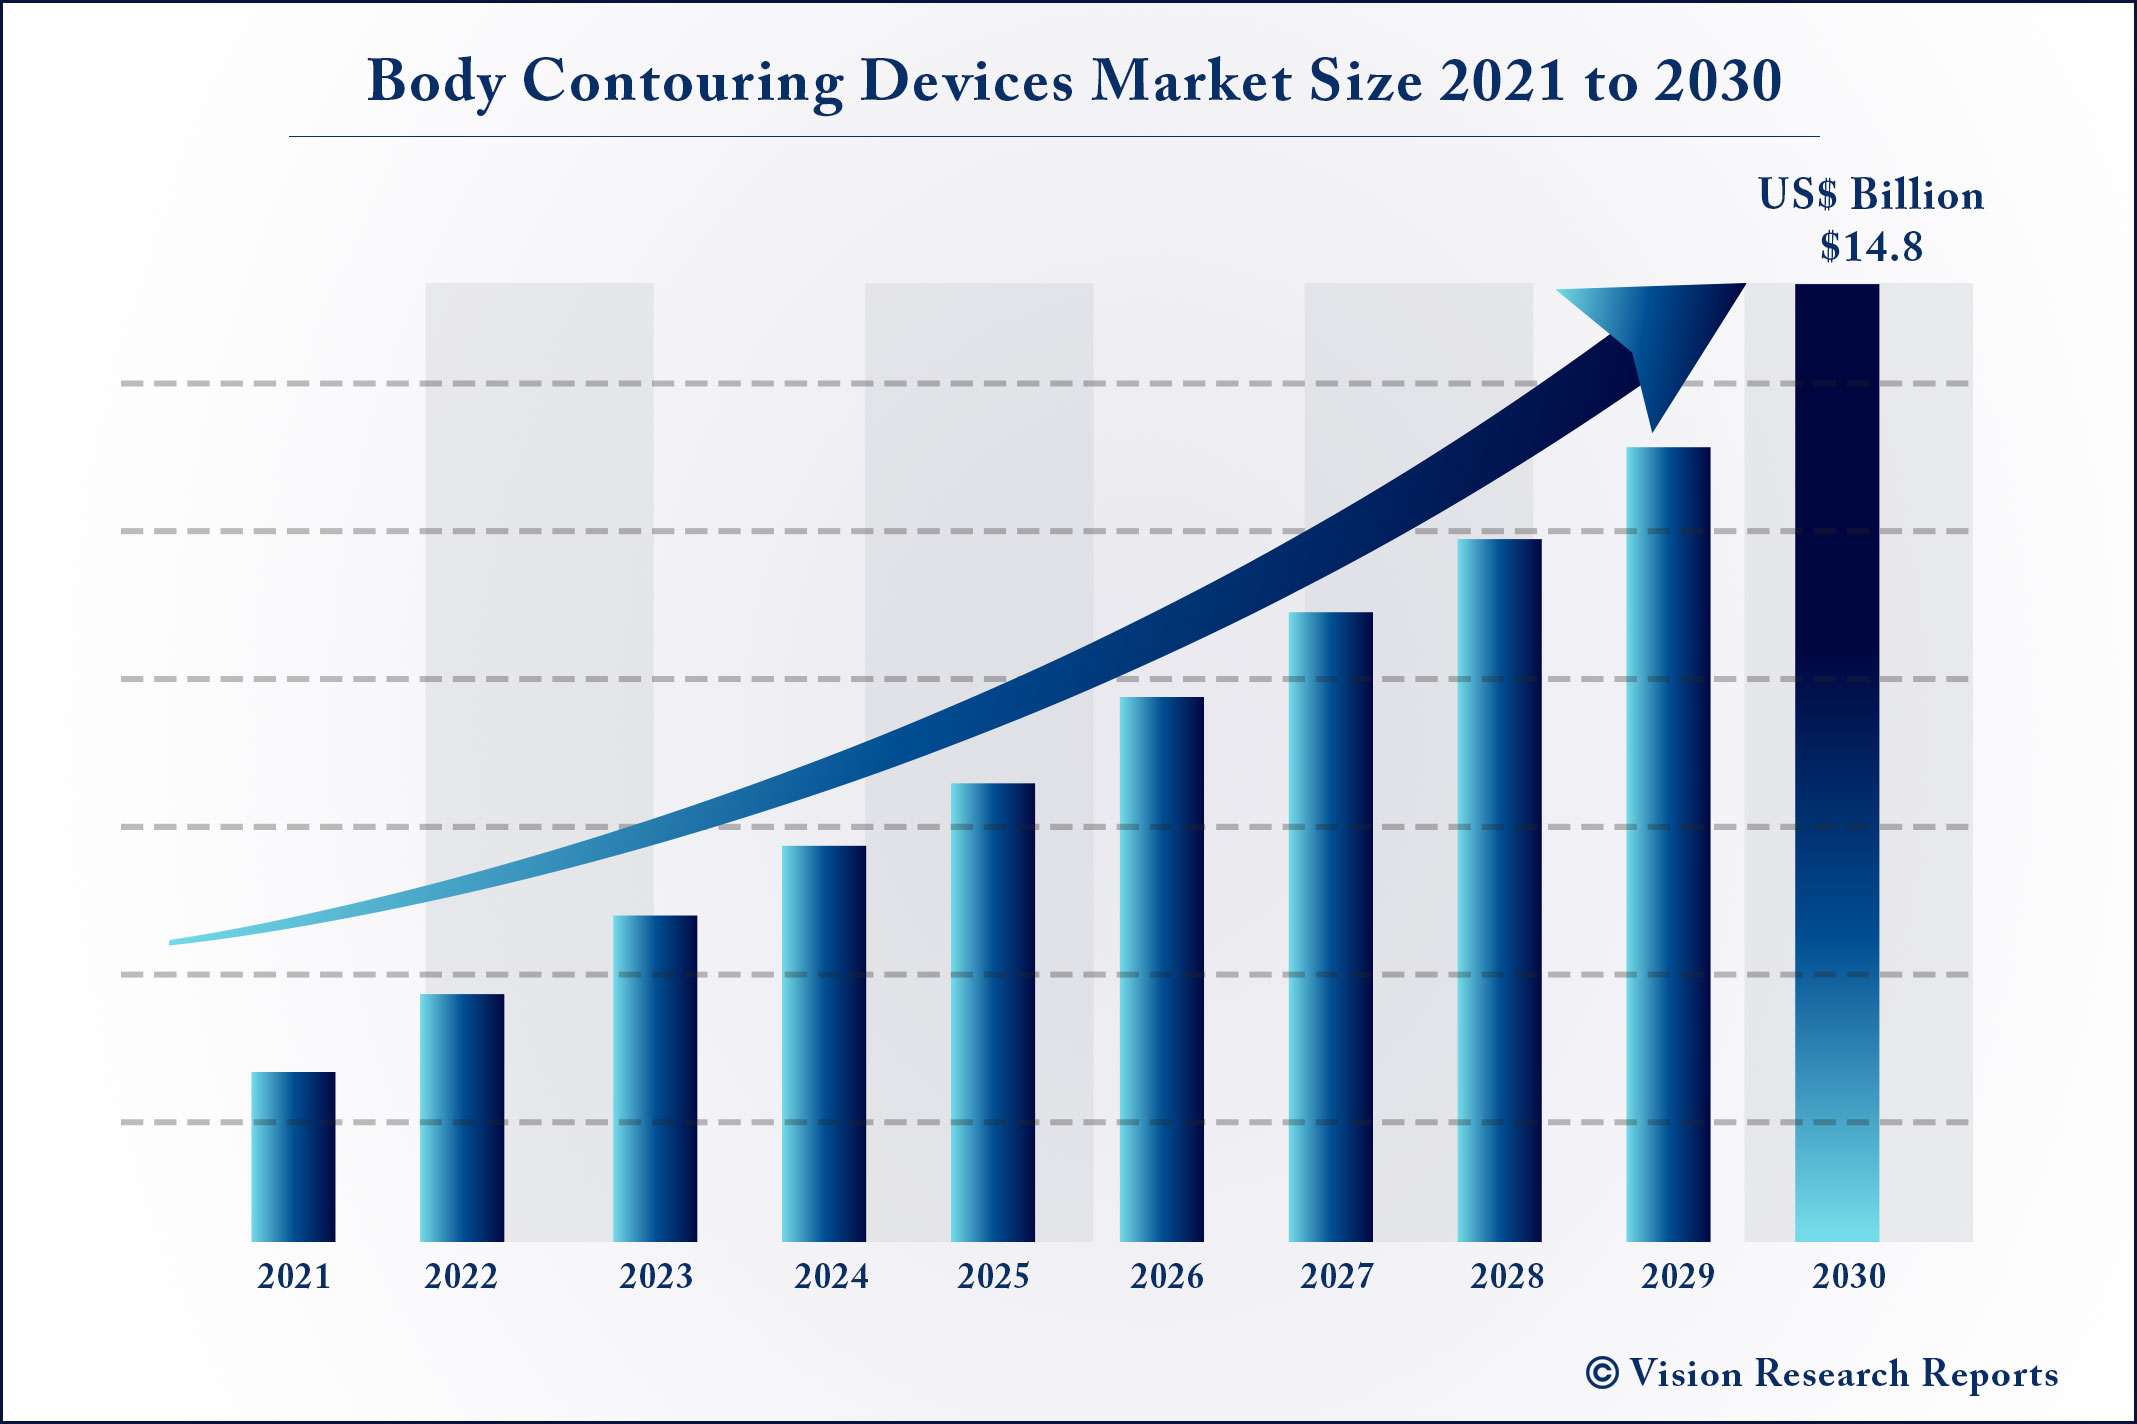 Body Contouring Devices Market Size 2021 to 2030